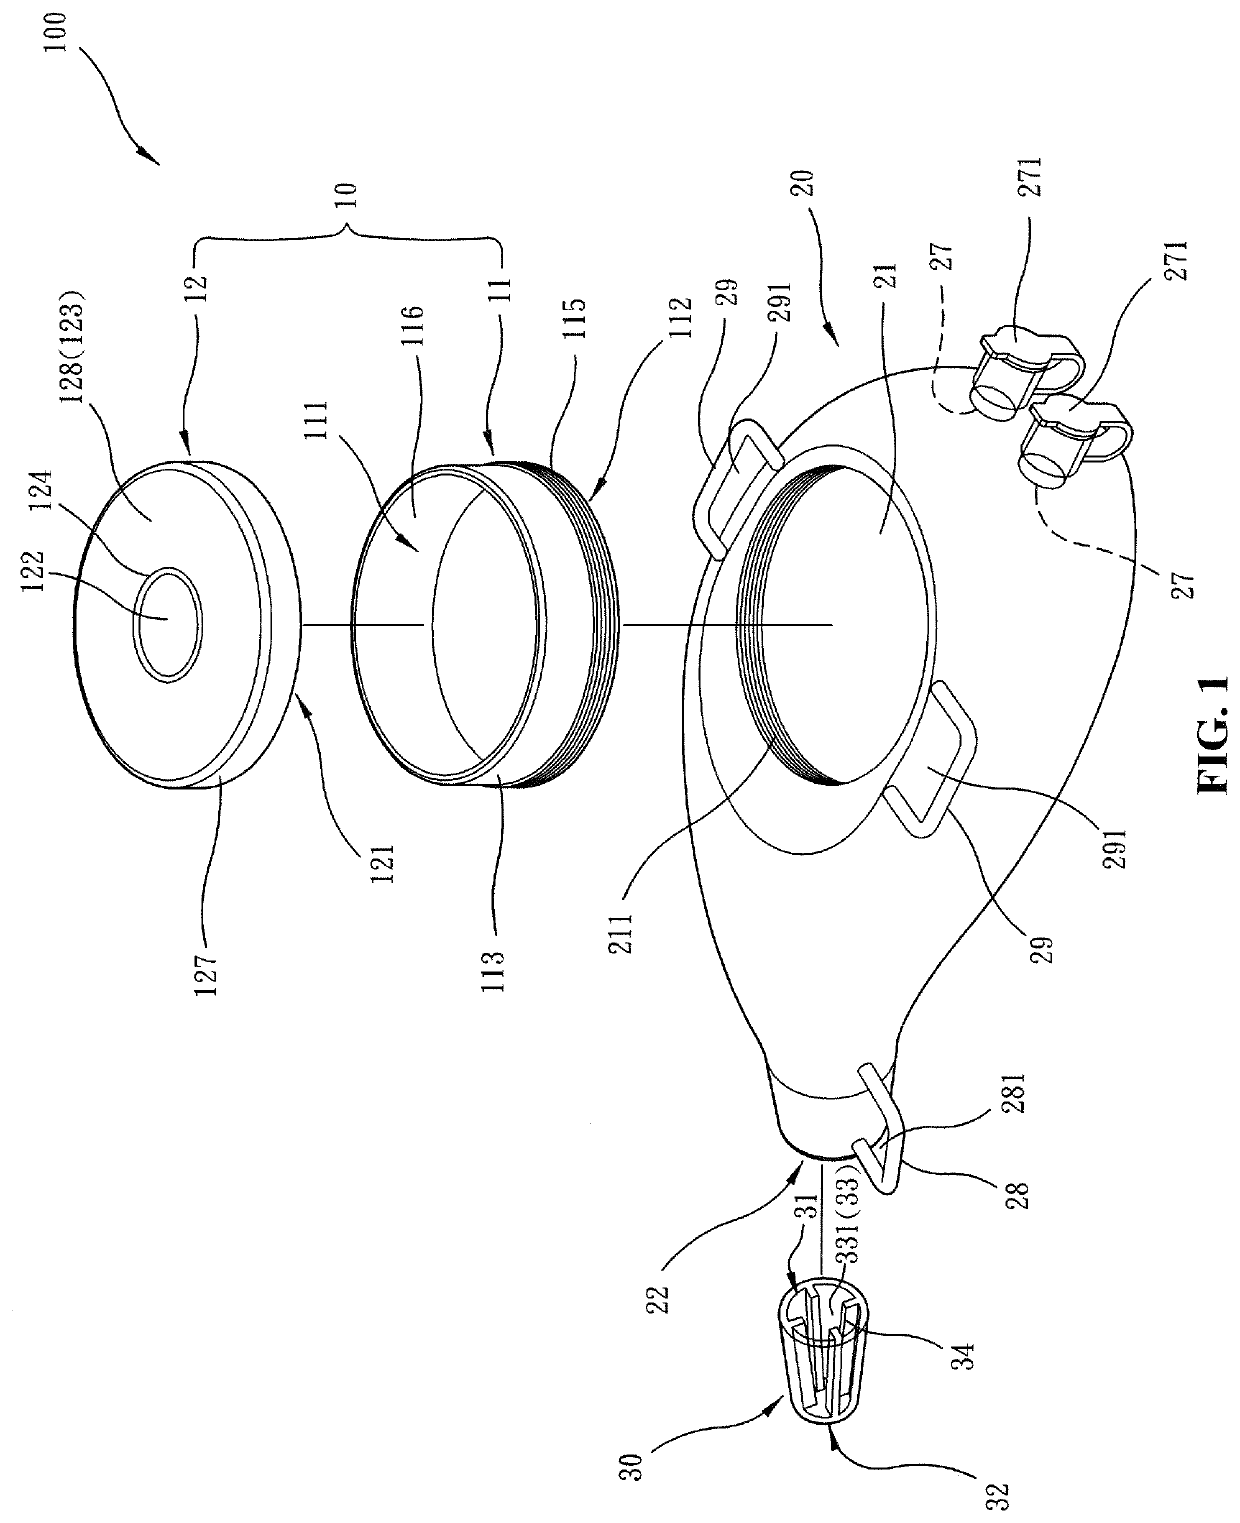 Contact piece and urine discharge device